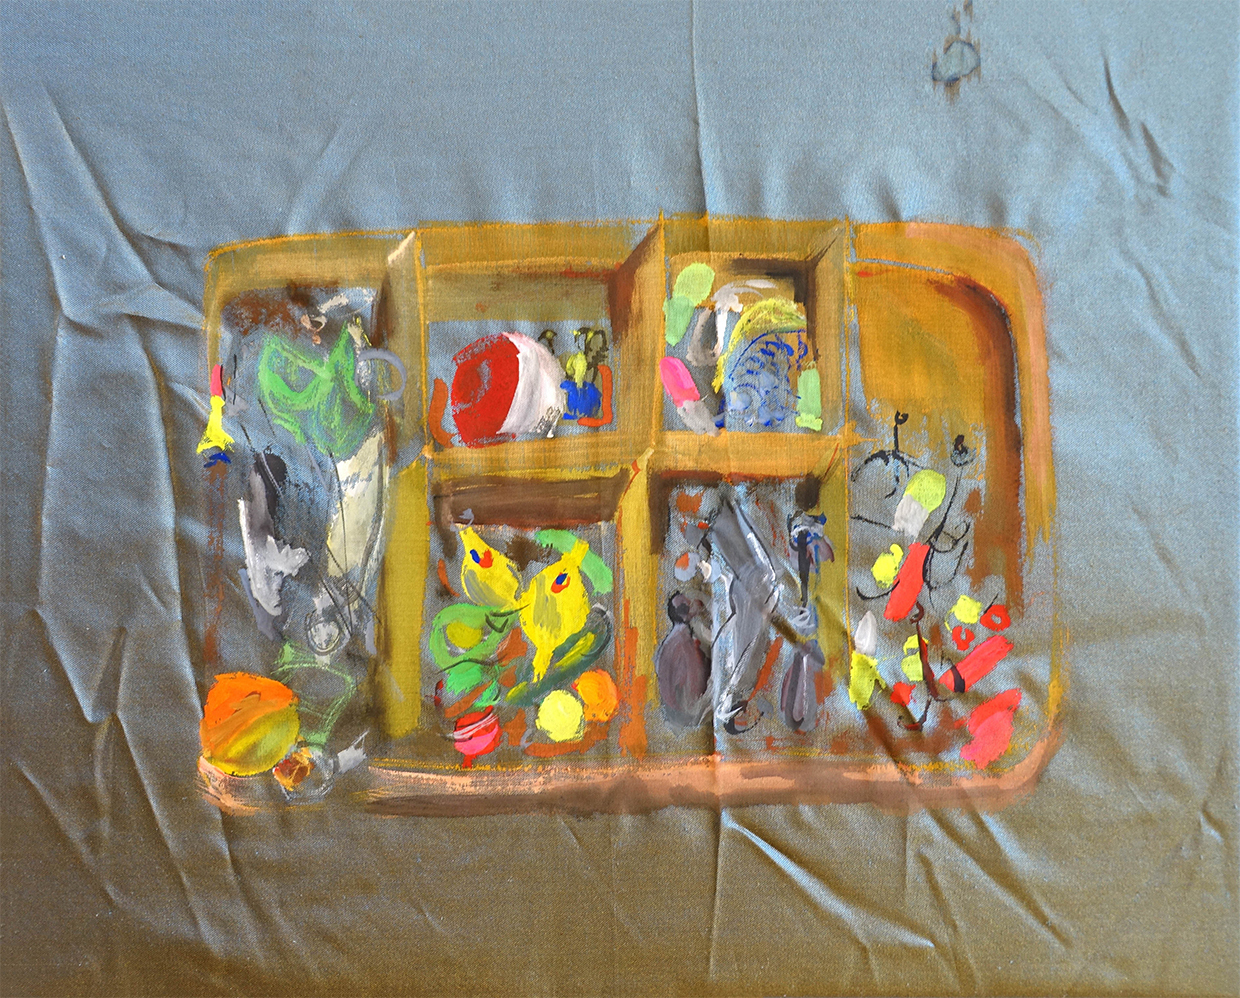 Maggie Crowley, A Packed Lunch, A Tackle Box, 2020, gouache on silk, 8 x 10 inches